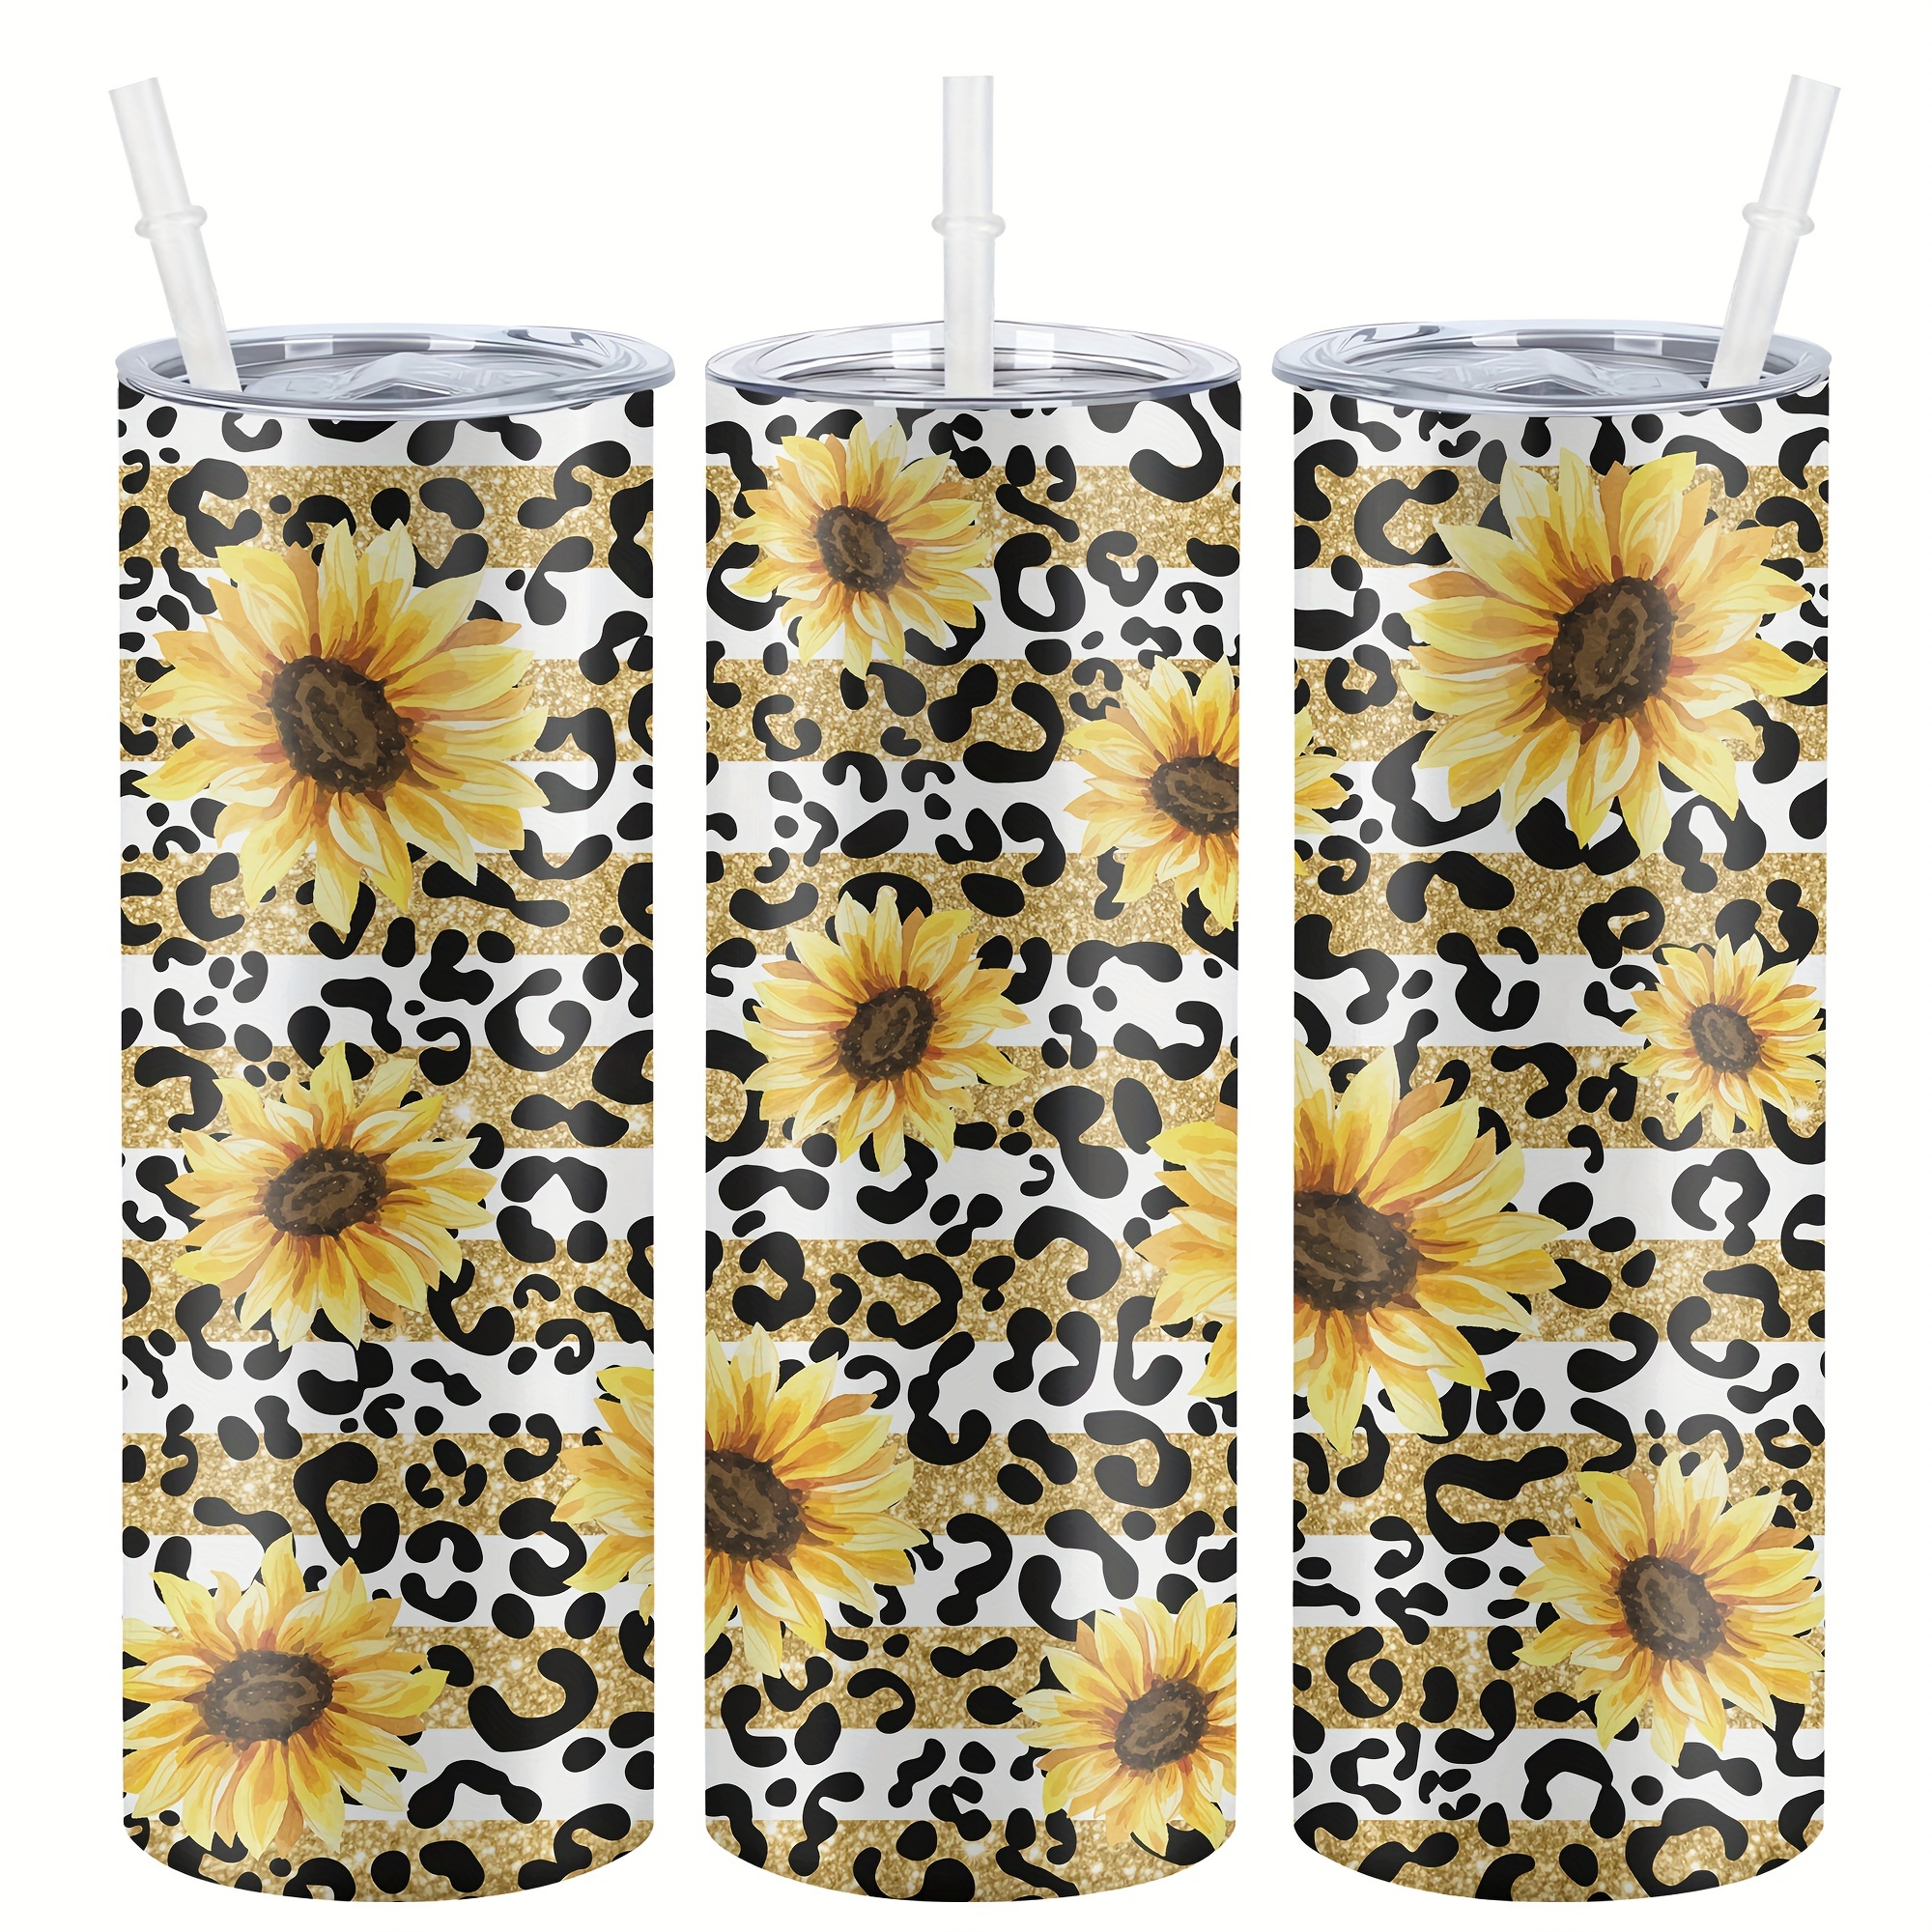 

1pc, Sunflower Print Stainless Steel Tumblers With Lids And Straws, 20 Oz Insulated Water Bottles, Glitter Leopard Pattern, Travel Drinkware For Hot And Cold Beverages, Summer Essentials